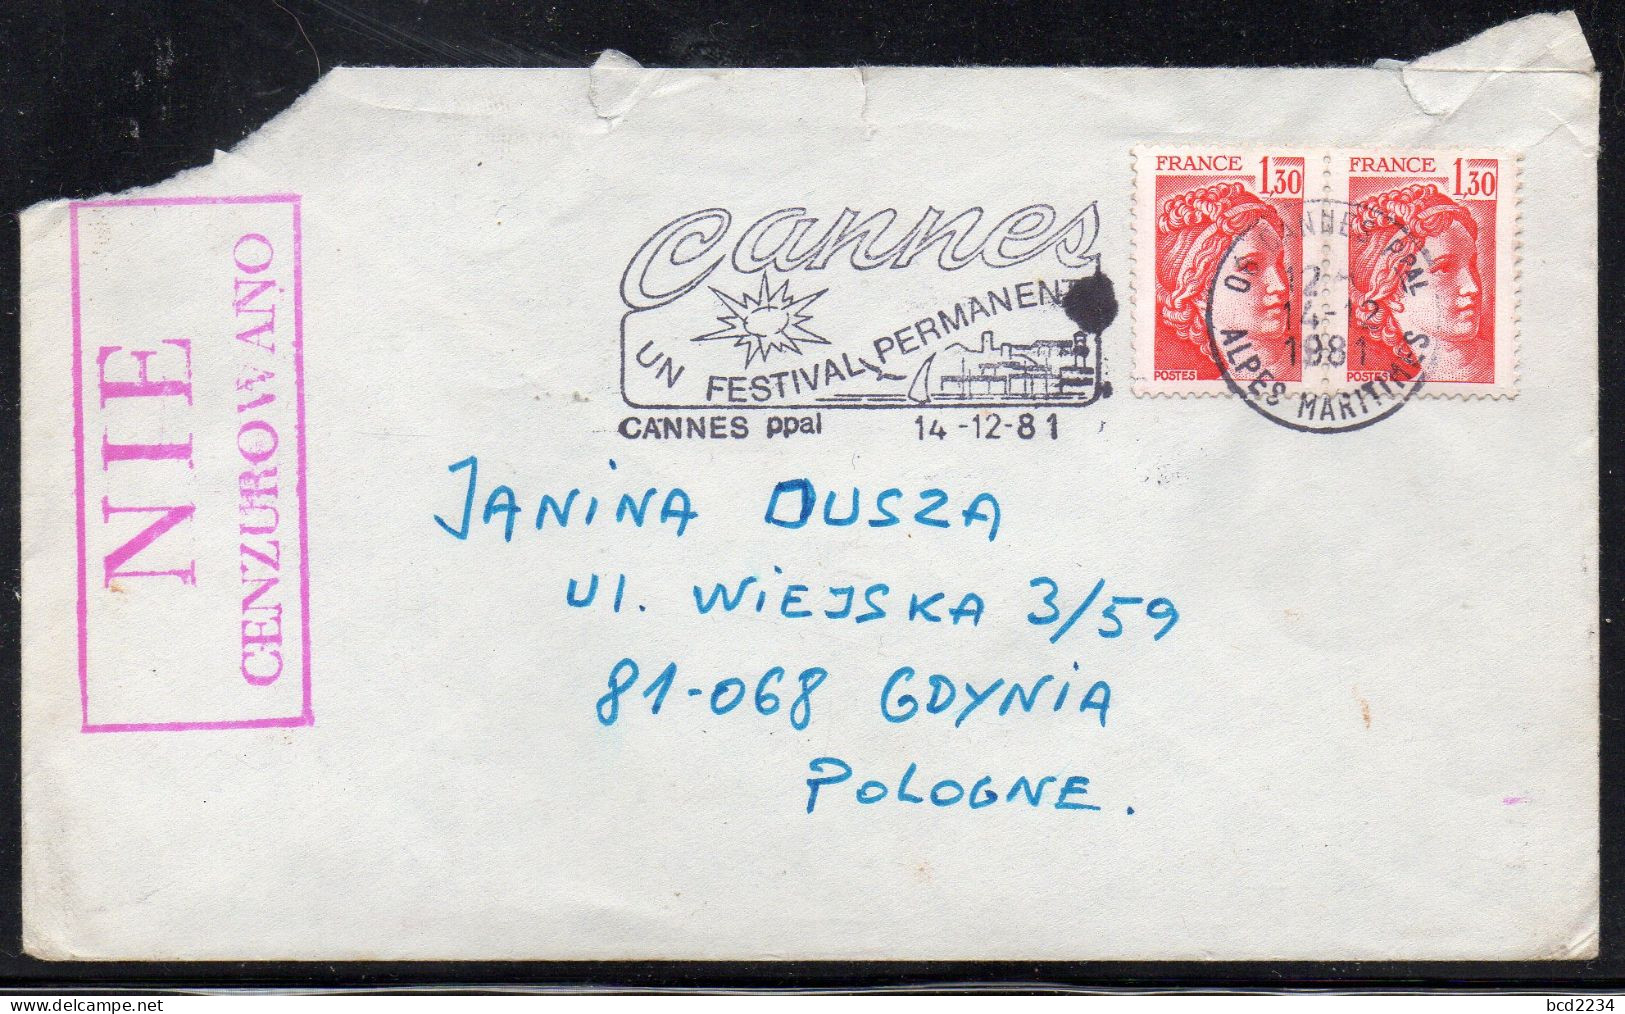 POLAND 1981 SOLIDARITY SOLIDARNOSC PERIOD MARTIAL LAW NIE CENZUROWANO NOT CENSORED MAUVE CACHET FRANCE TO GDYNIA - Covers & Documents